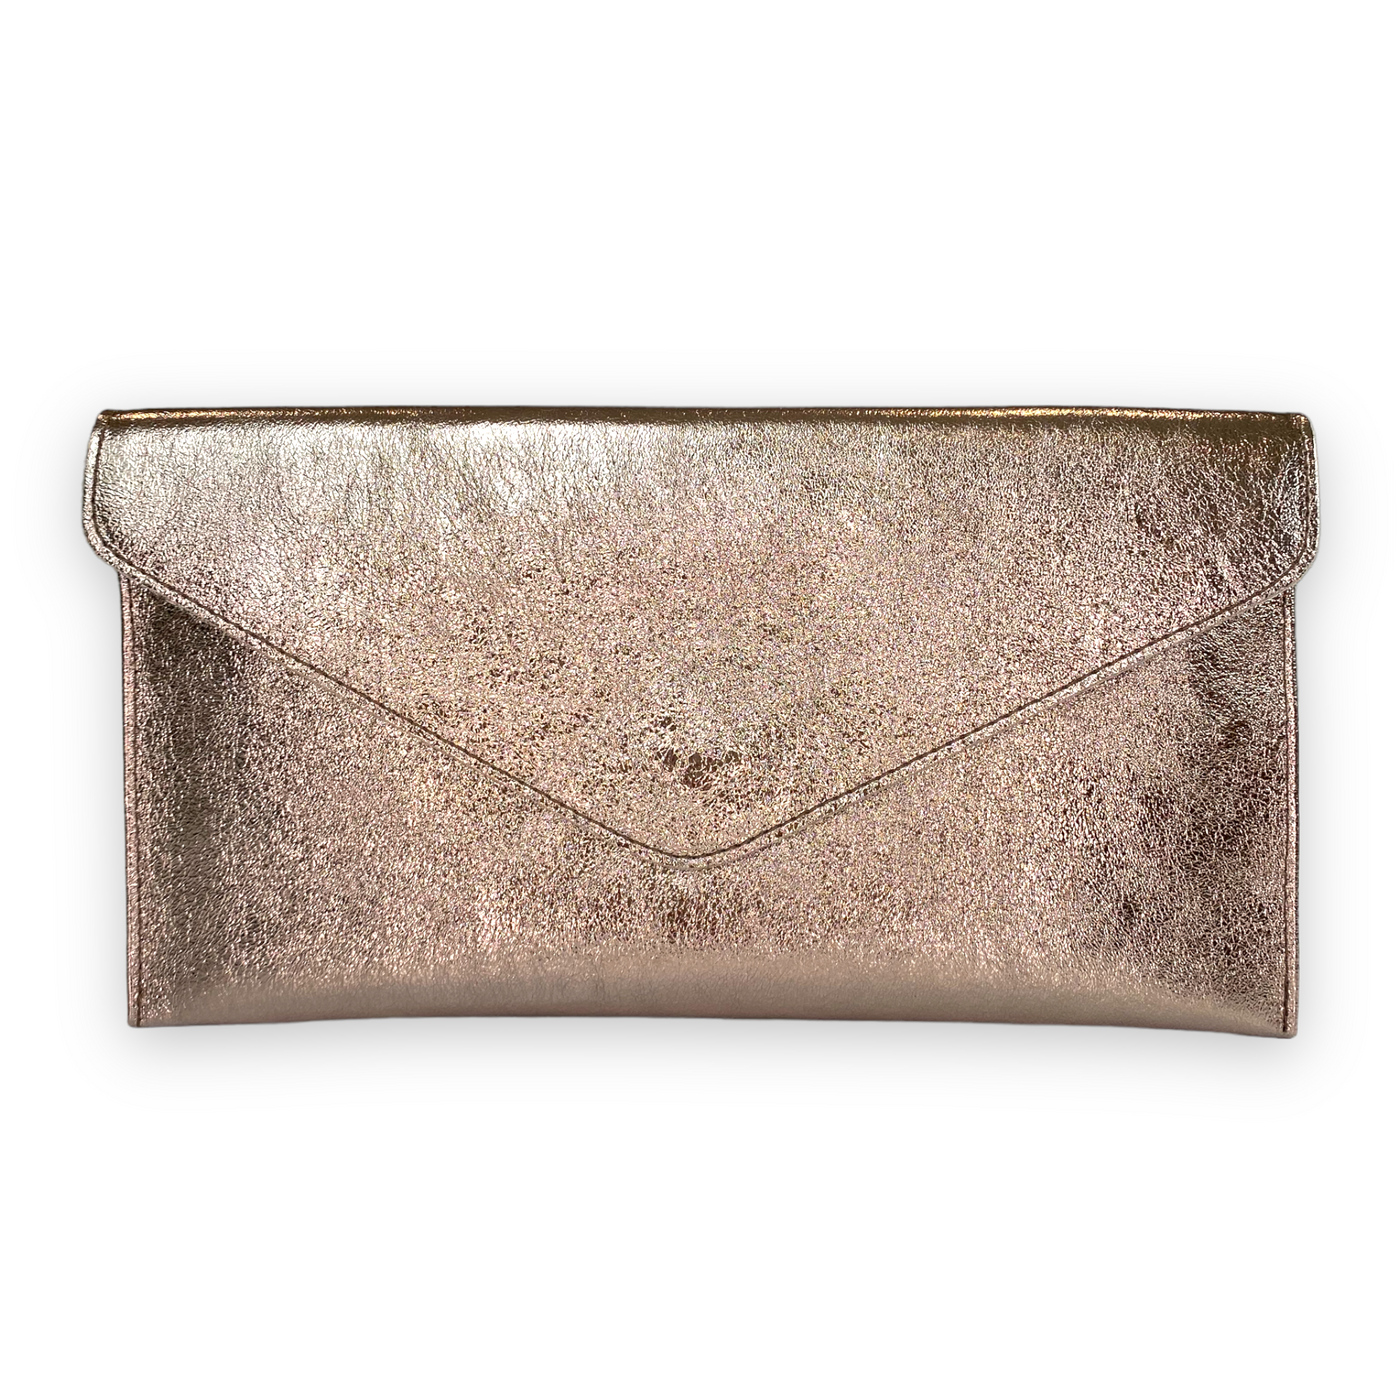 Leather Envelope Clutch Inc Chain Crossbody Strap - Pink Waters 